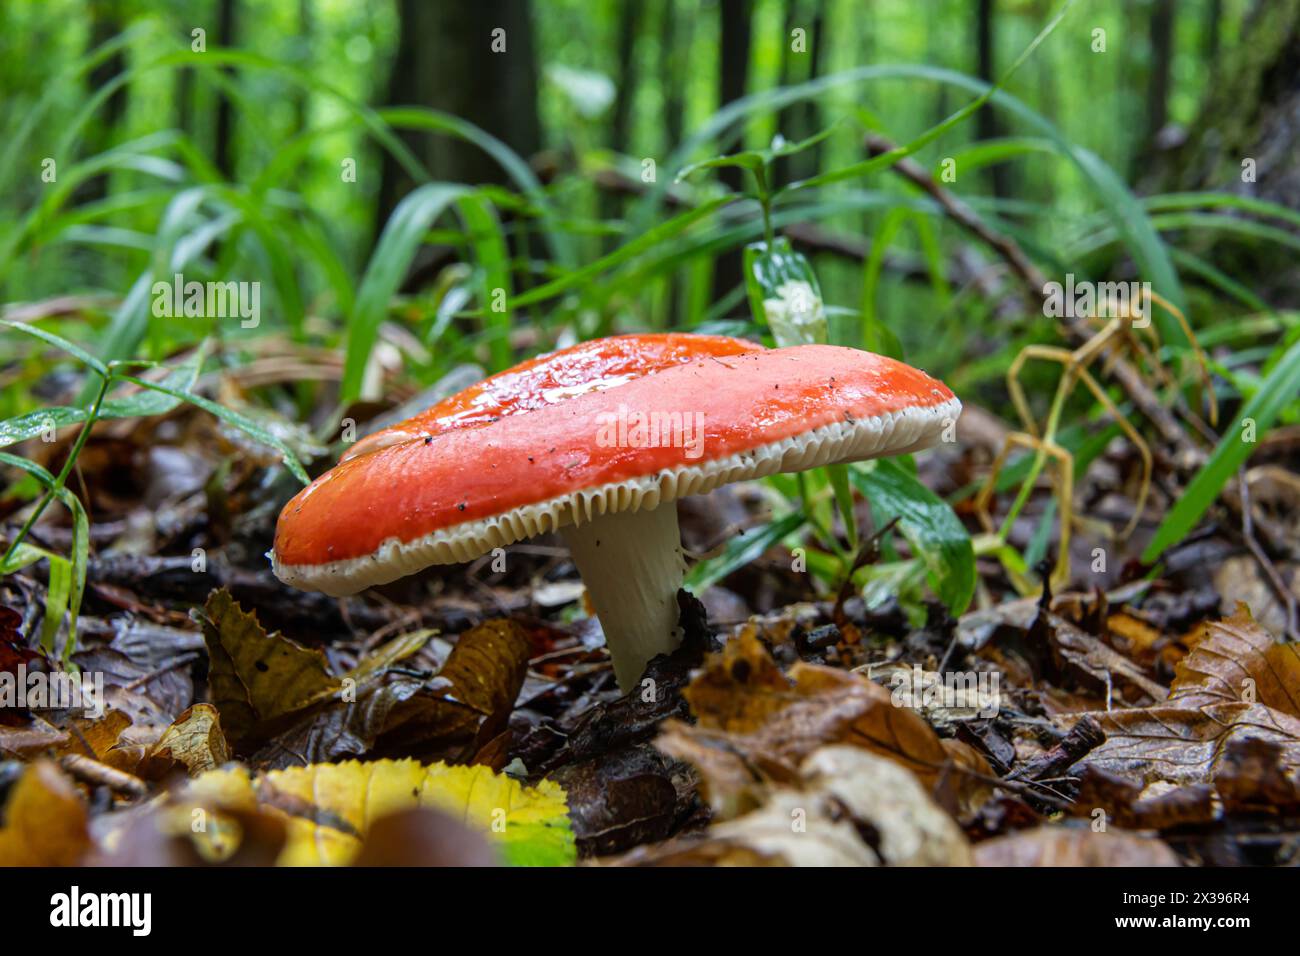 Russula xerampelina, also known as the crab brittlegill or the shrimp mushroom in forest. Stock Photo